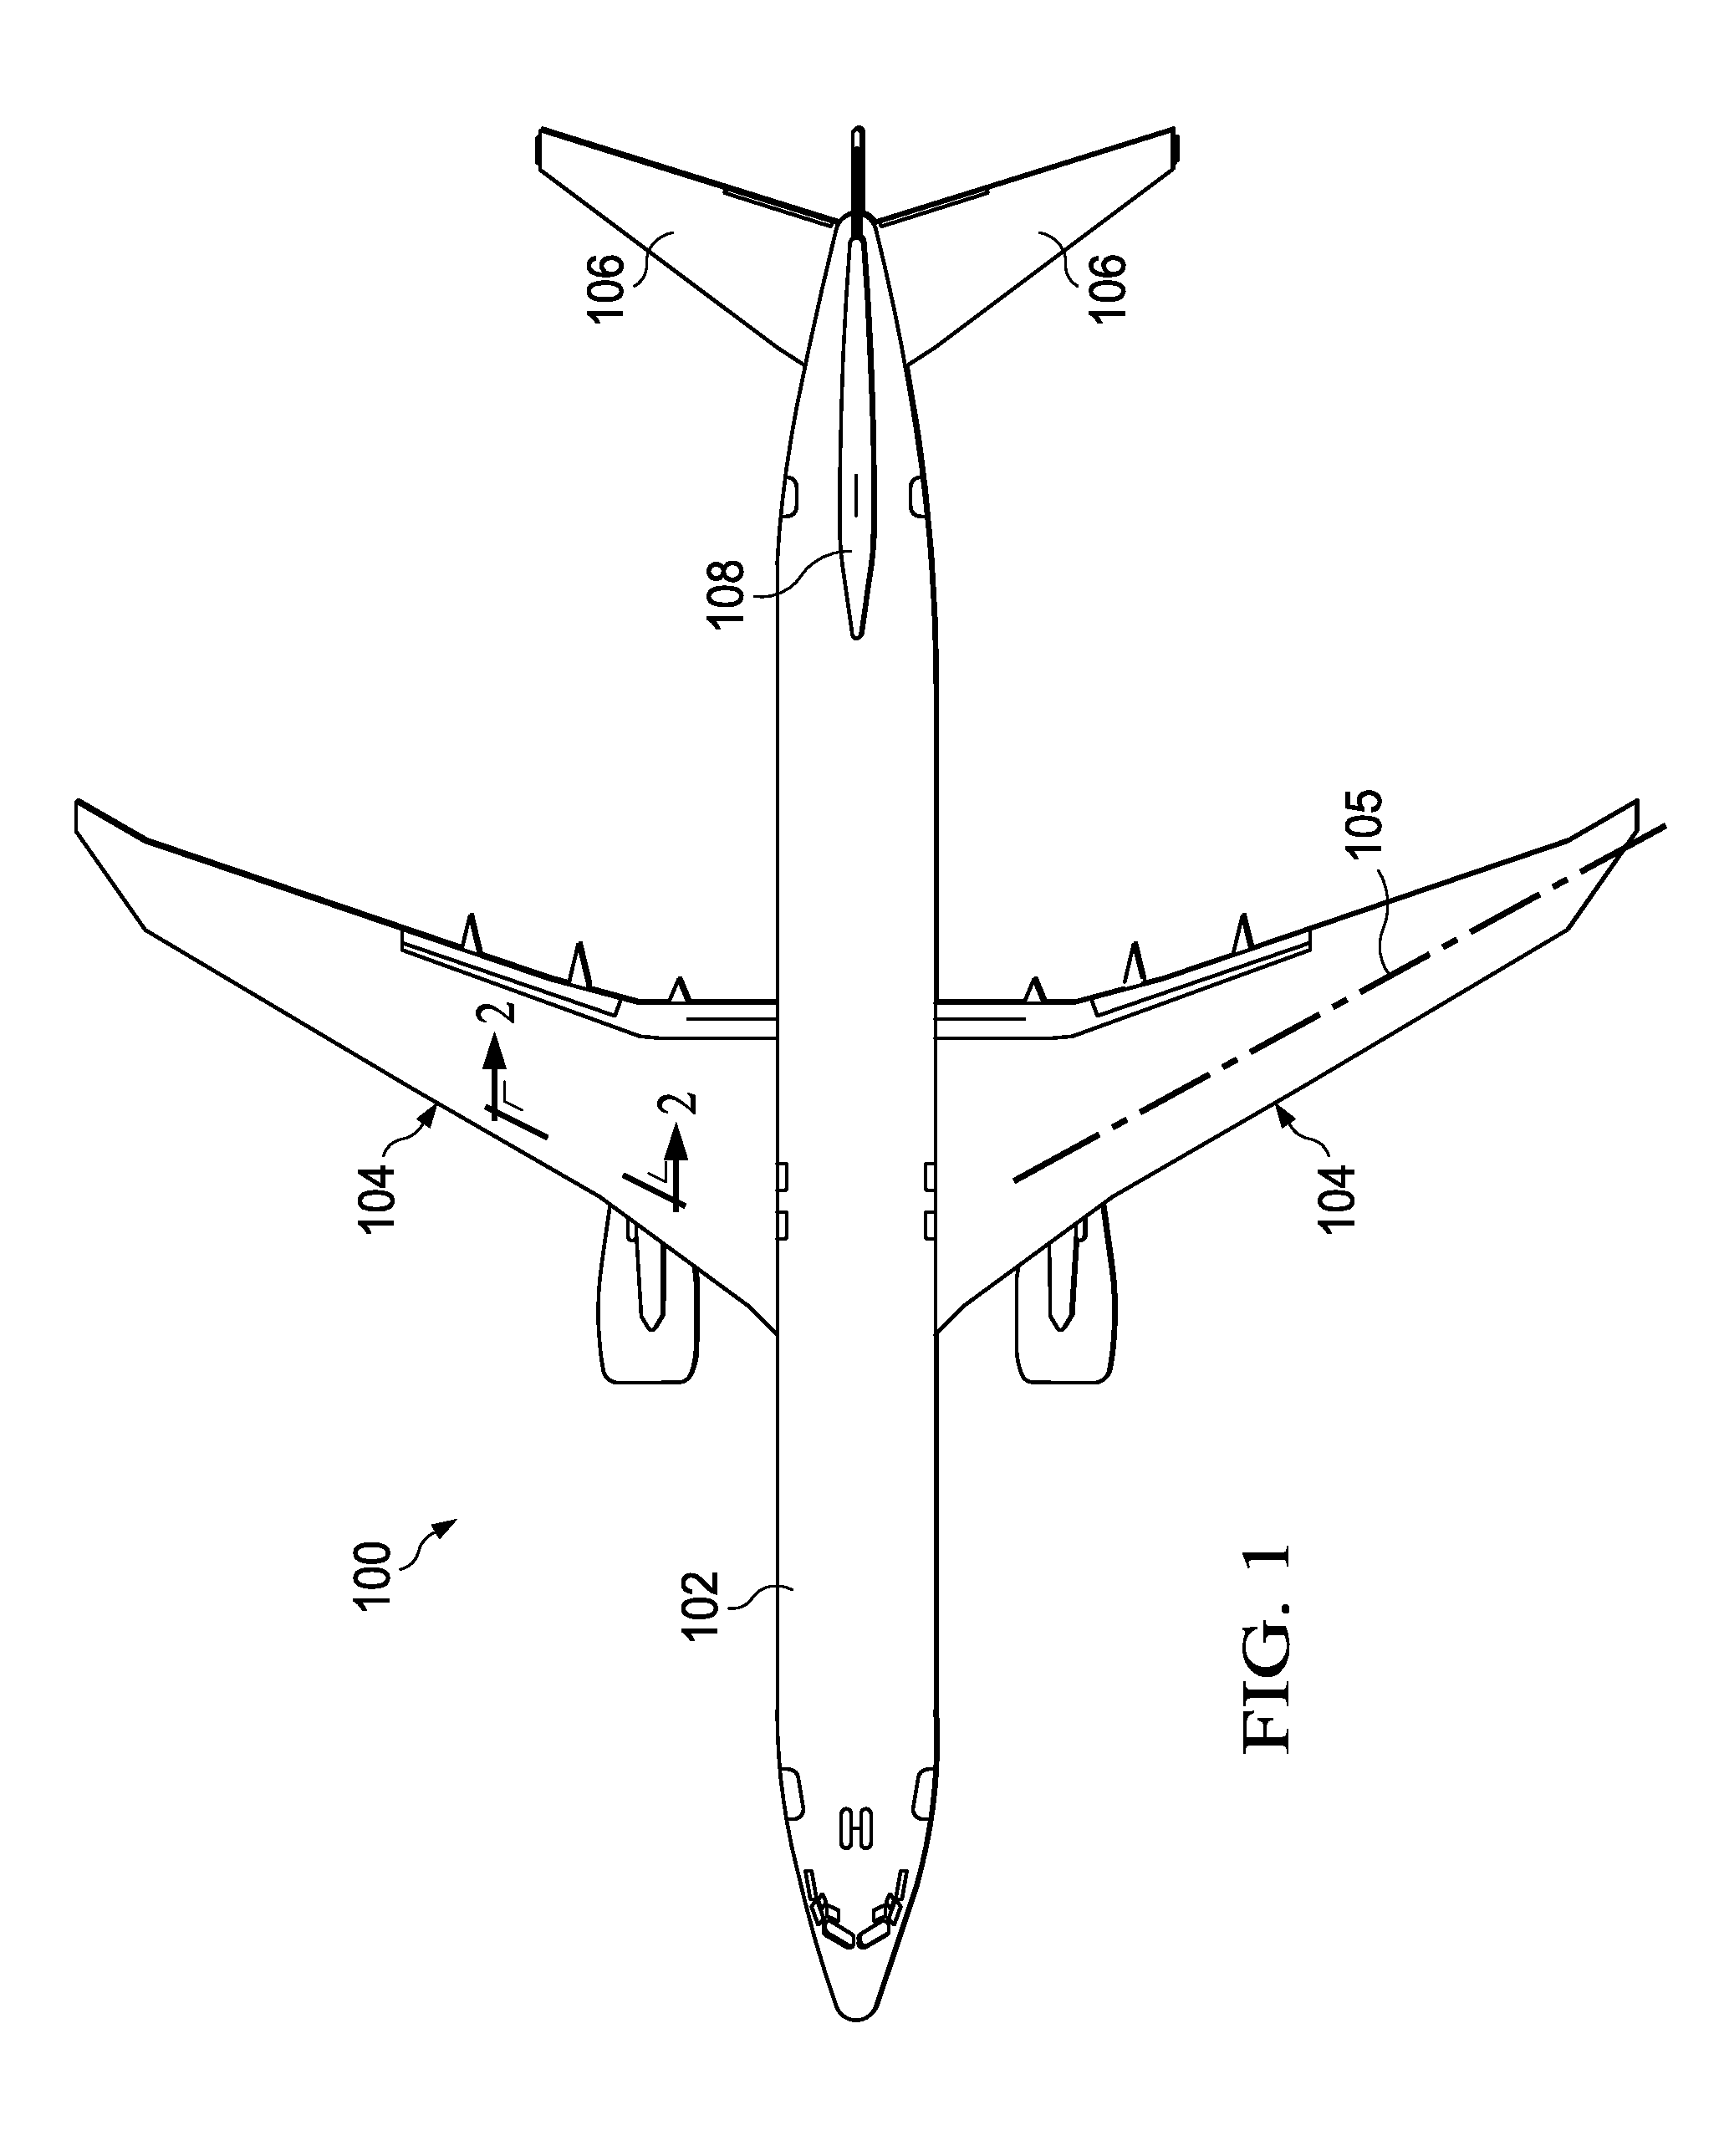 Method and apparatus for fabricating large scale integrated airfoils